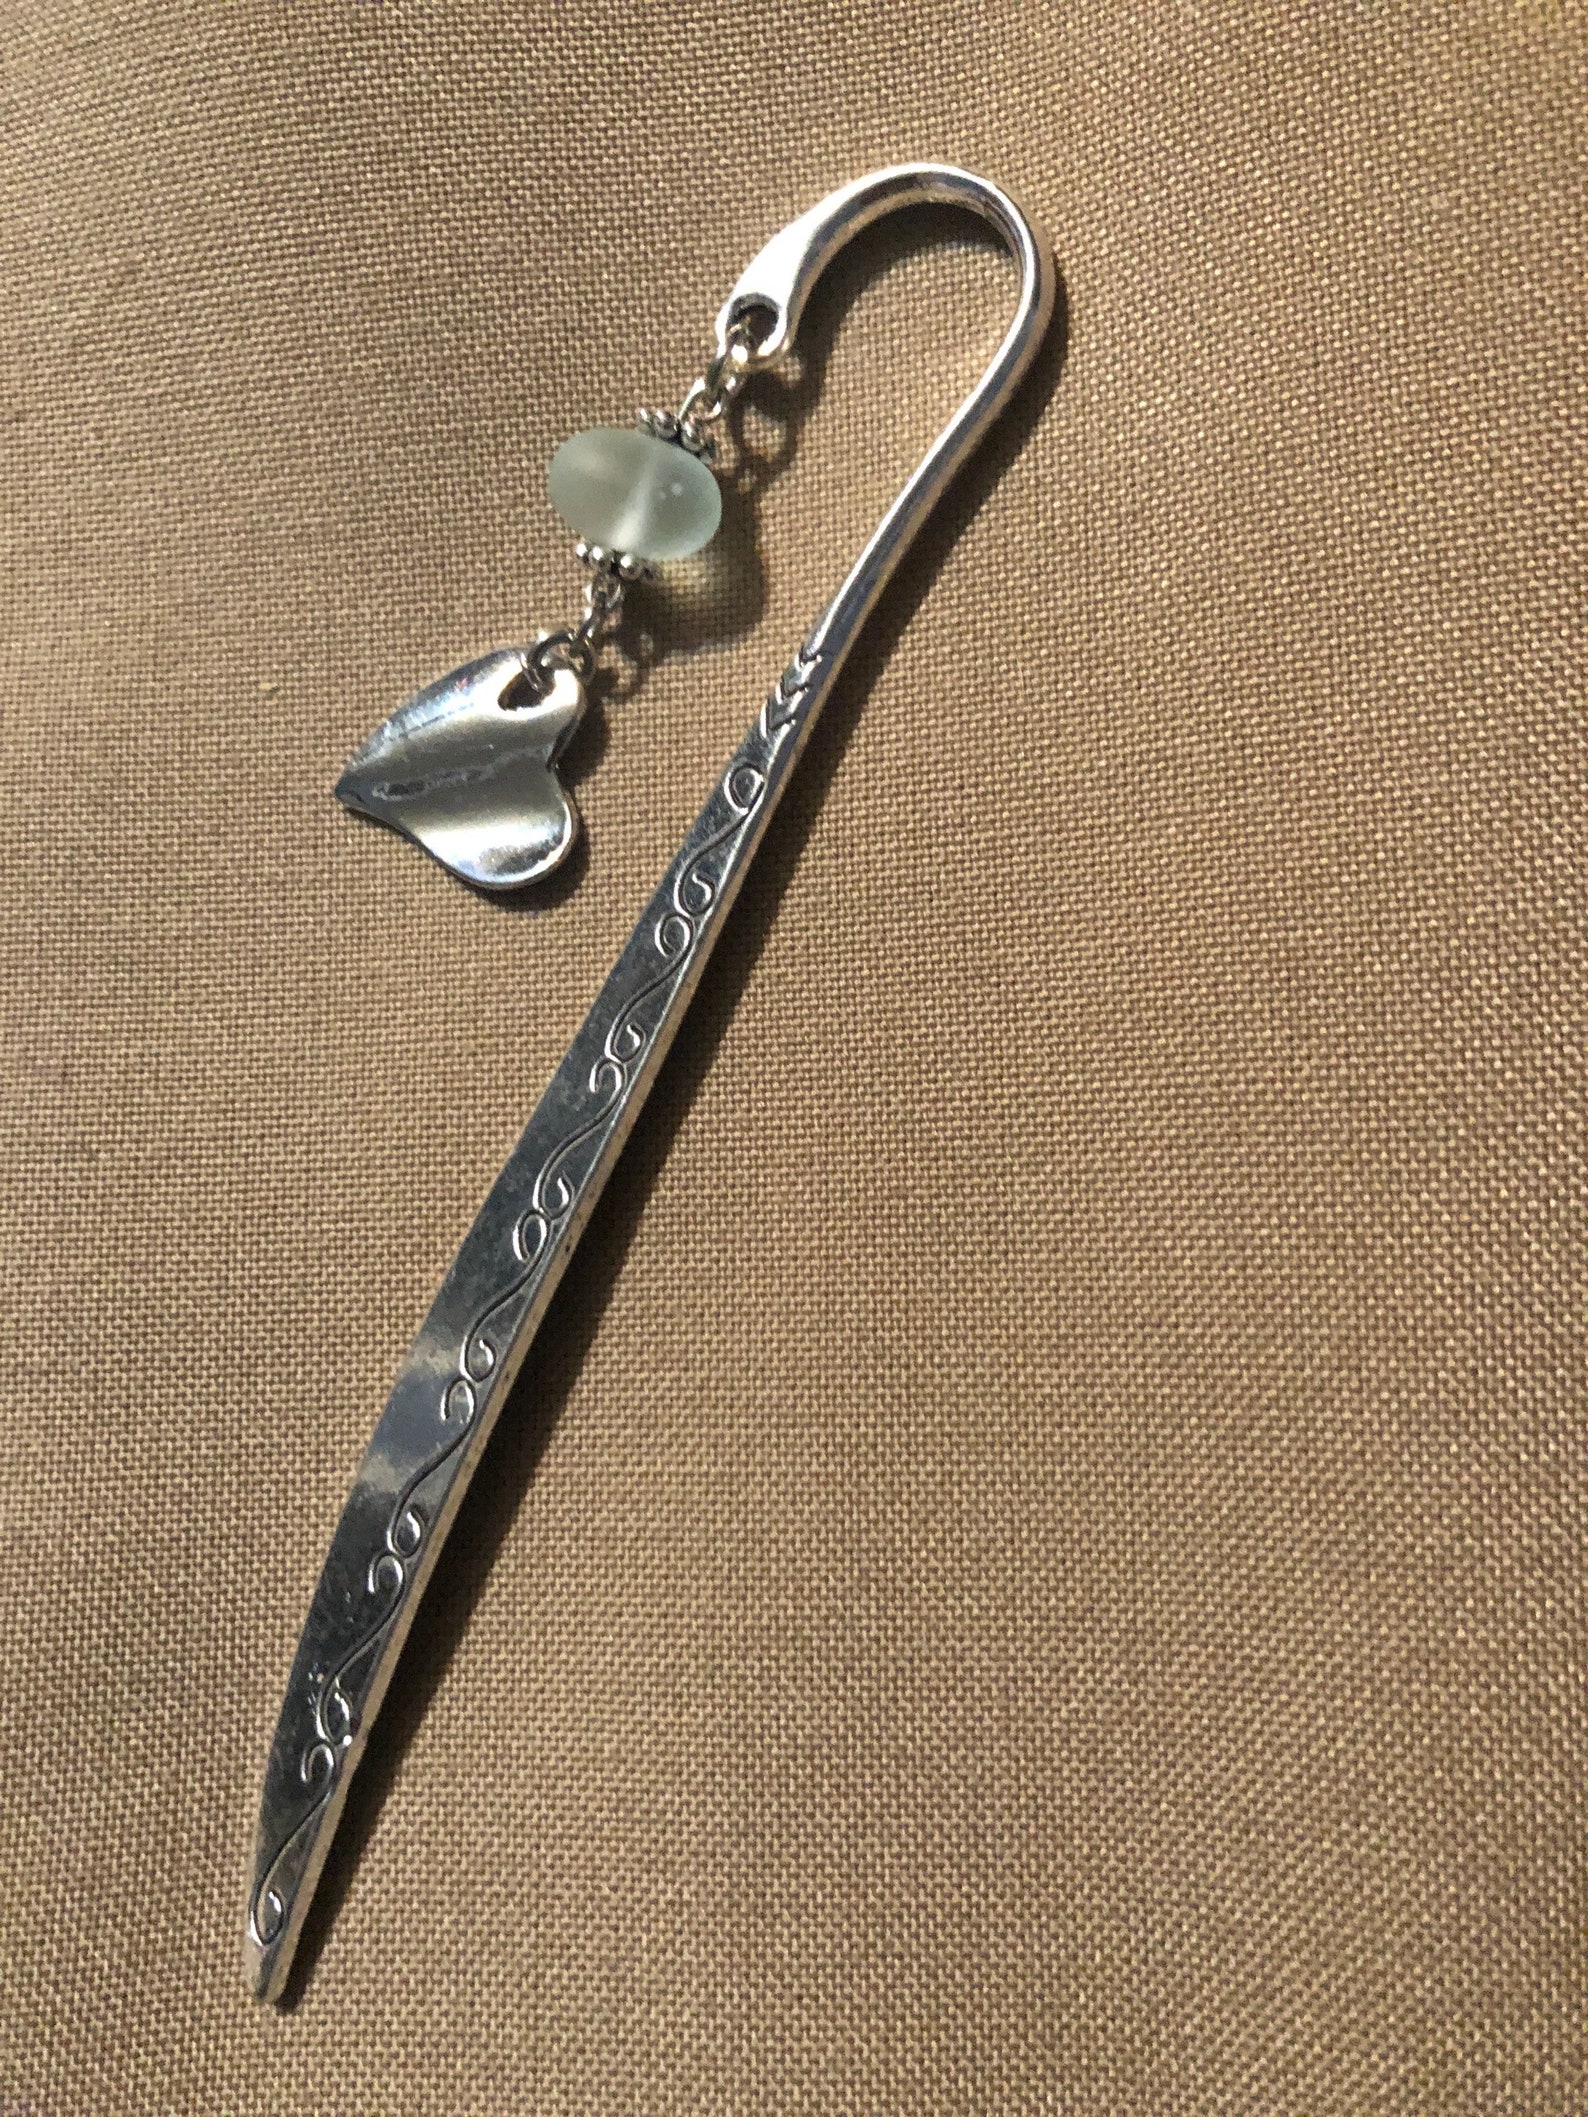 Antique Silver Bookmark 4 1/2 inch Bookmark with Blue sea | Etsy